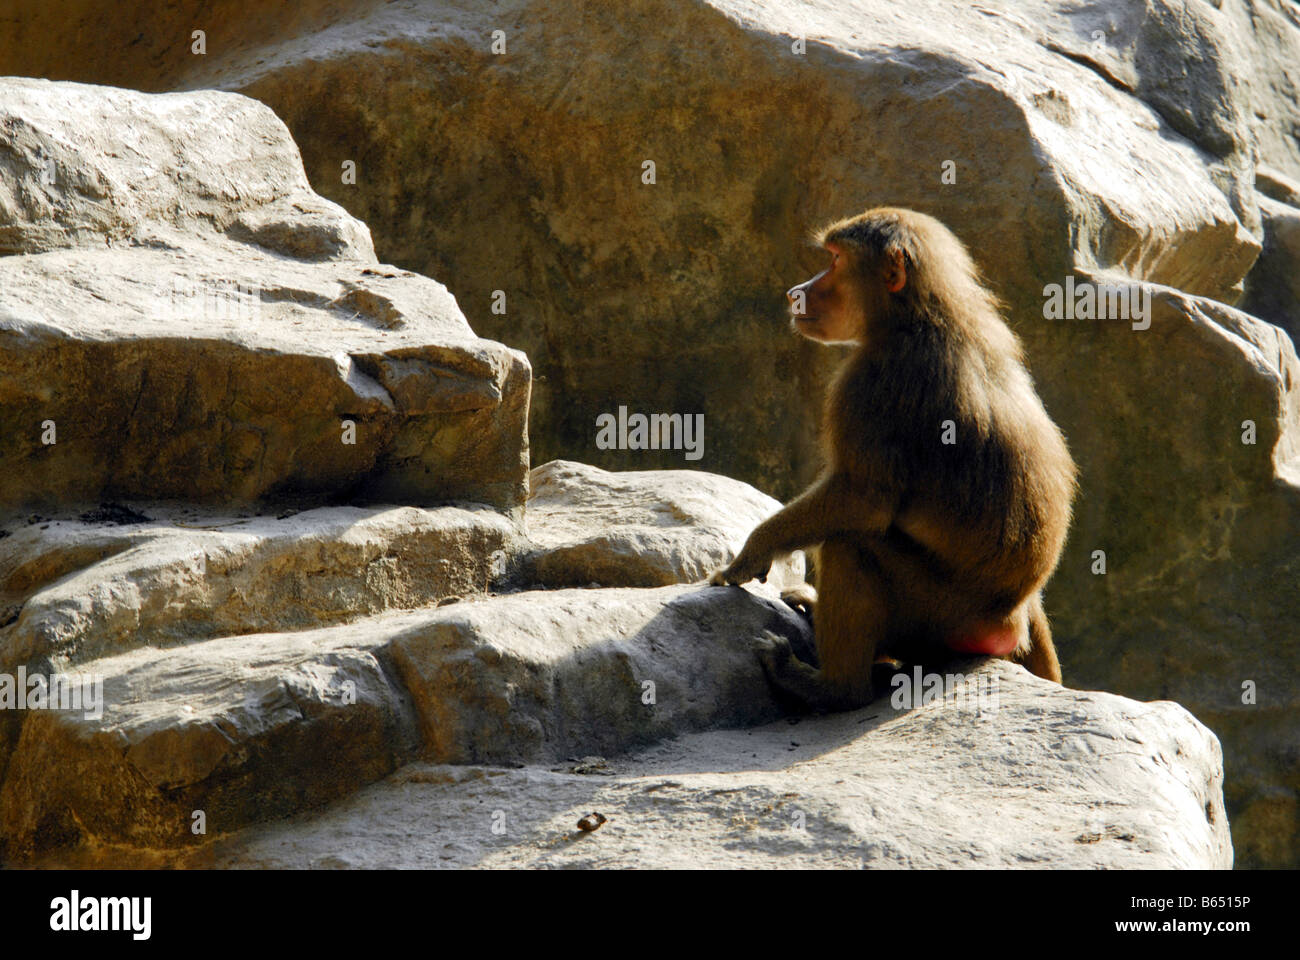 A HAMADRYAS BABOON IN SINGAPORE ZOO Stock Photo